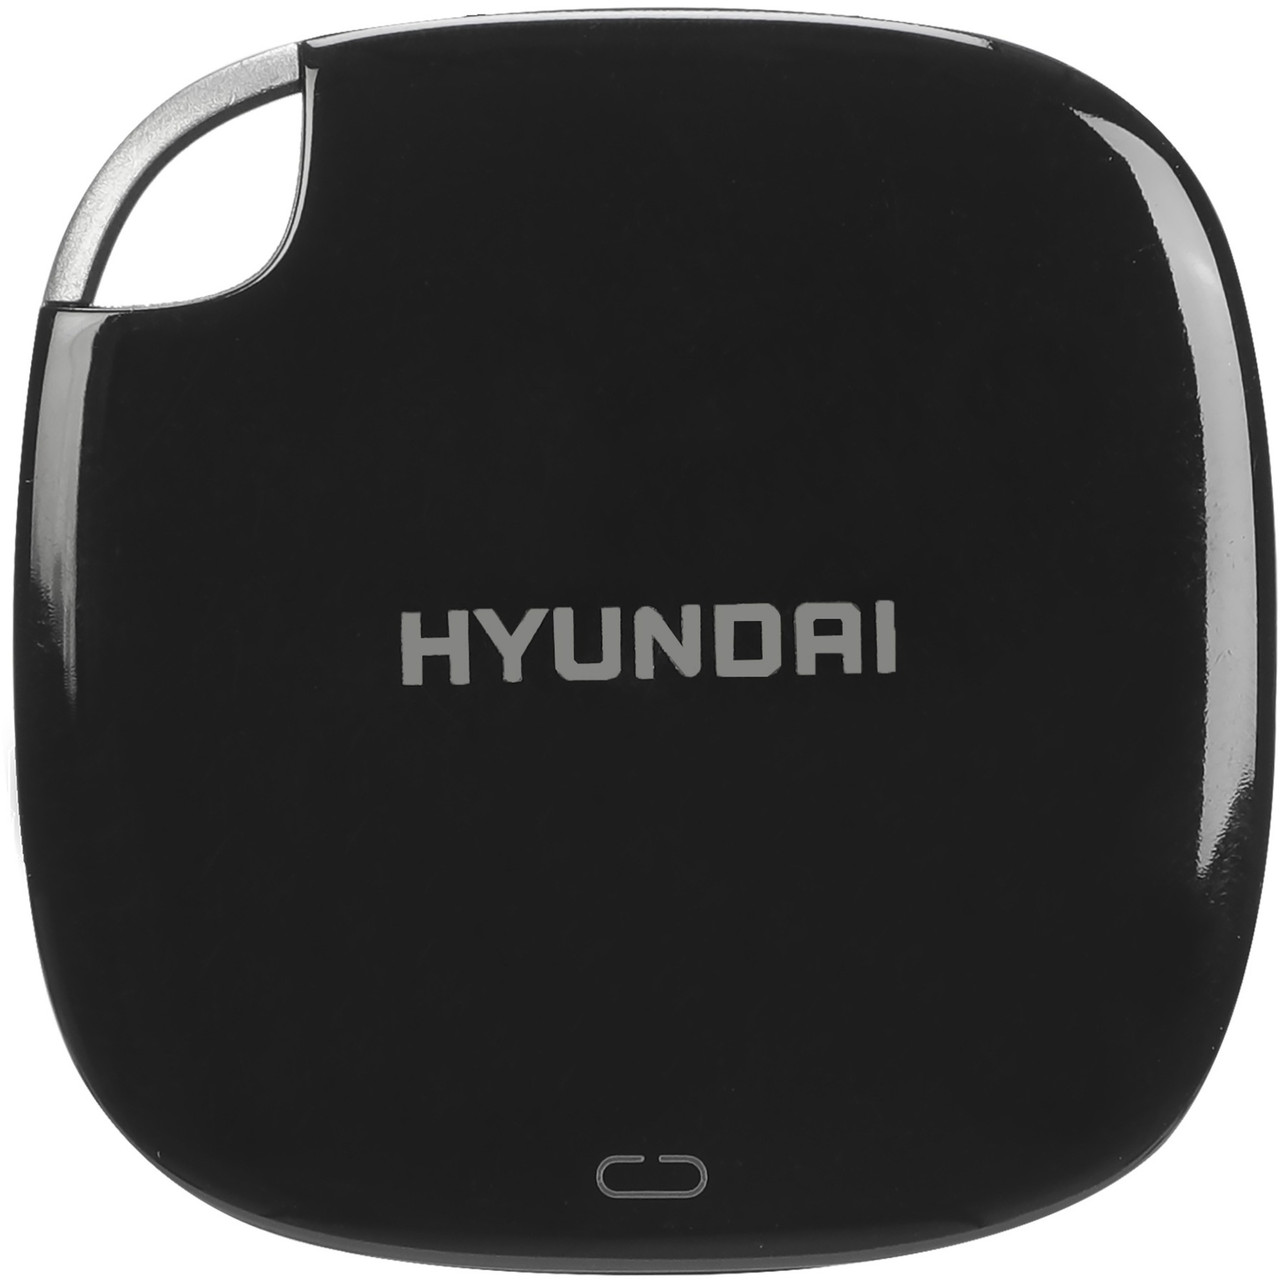 Hyundai 256GB Ultra-Portable Data Storage, Fast External SSD, PC/MAC/Mobile - USB-C to C, USB-A to C, Dual Cable Included, Up to 450MB/s - Gen USB 3.1, Black - HTESD250PB